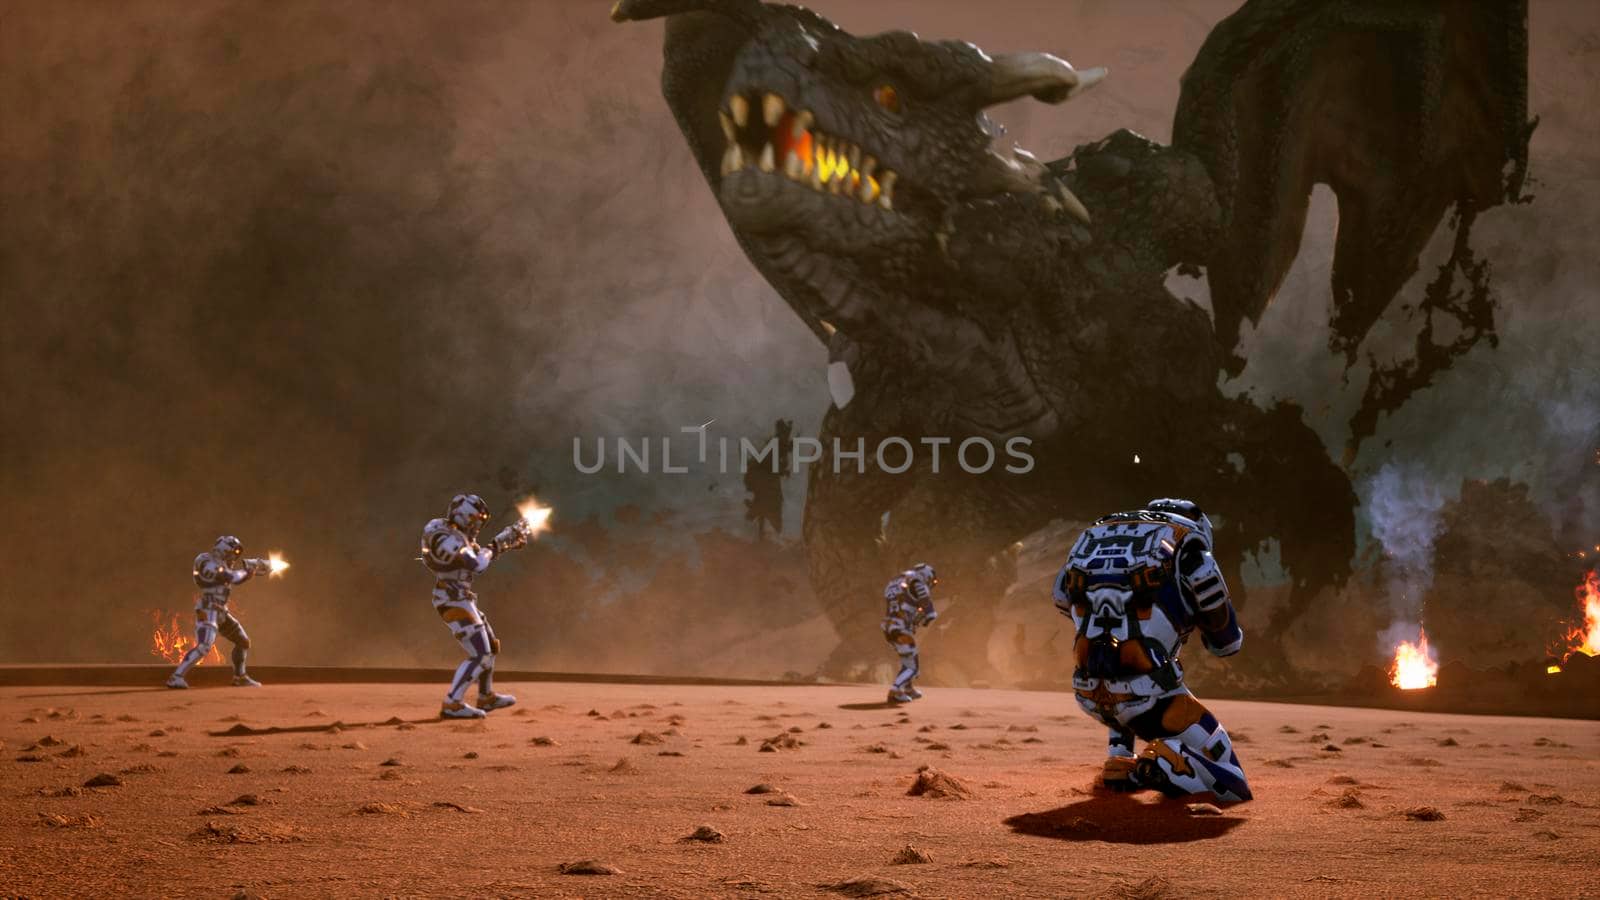 Astronauts against the dragon. Epic battle with explosions, shots and smoke on an uncharted planet.